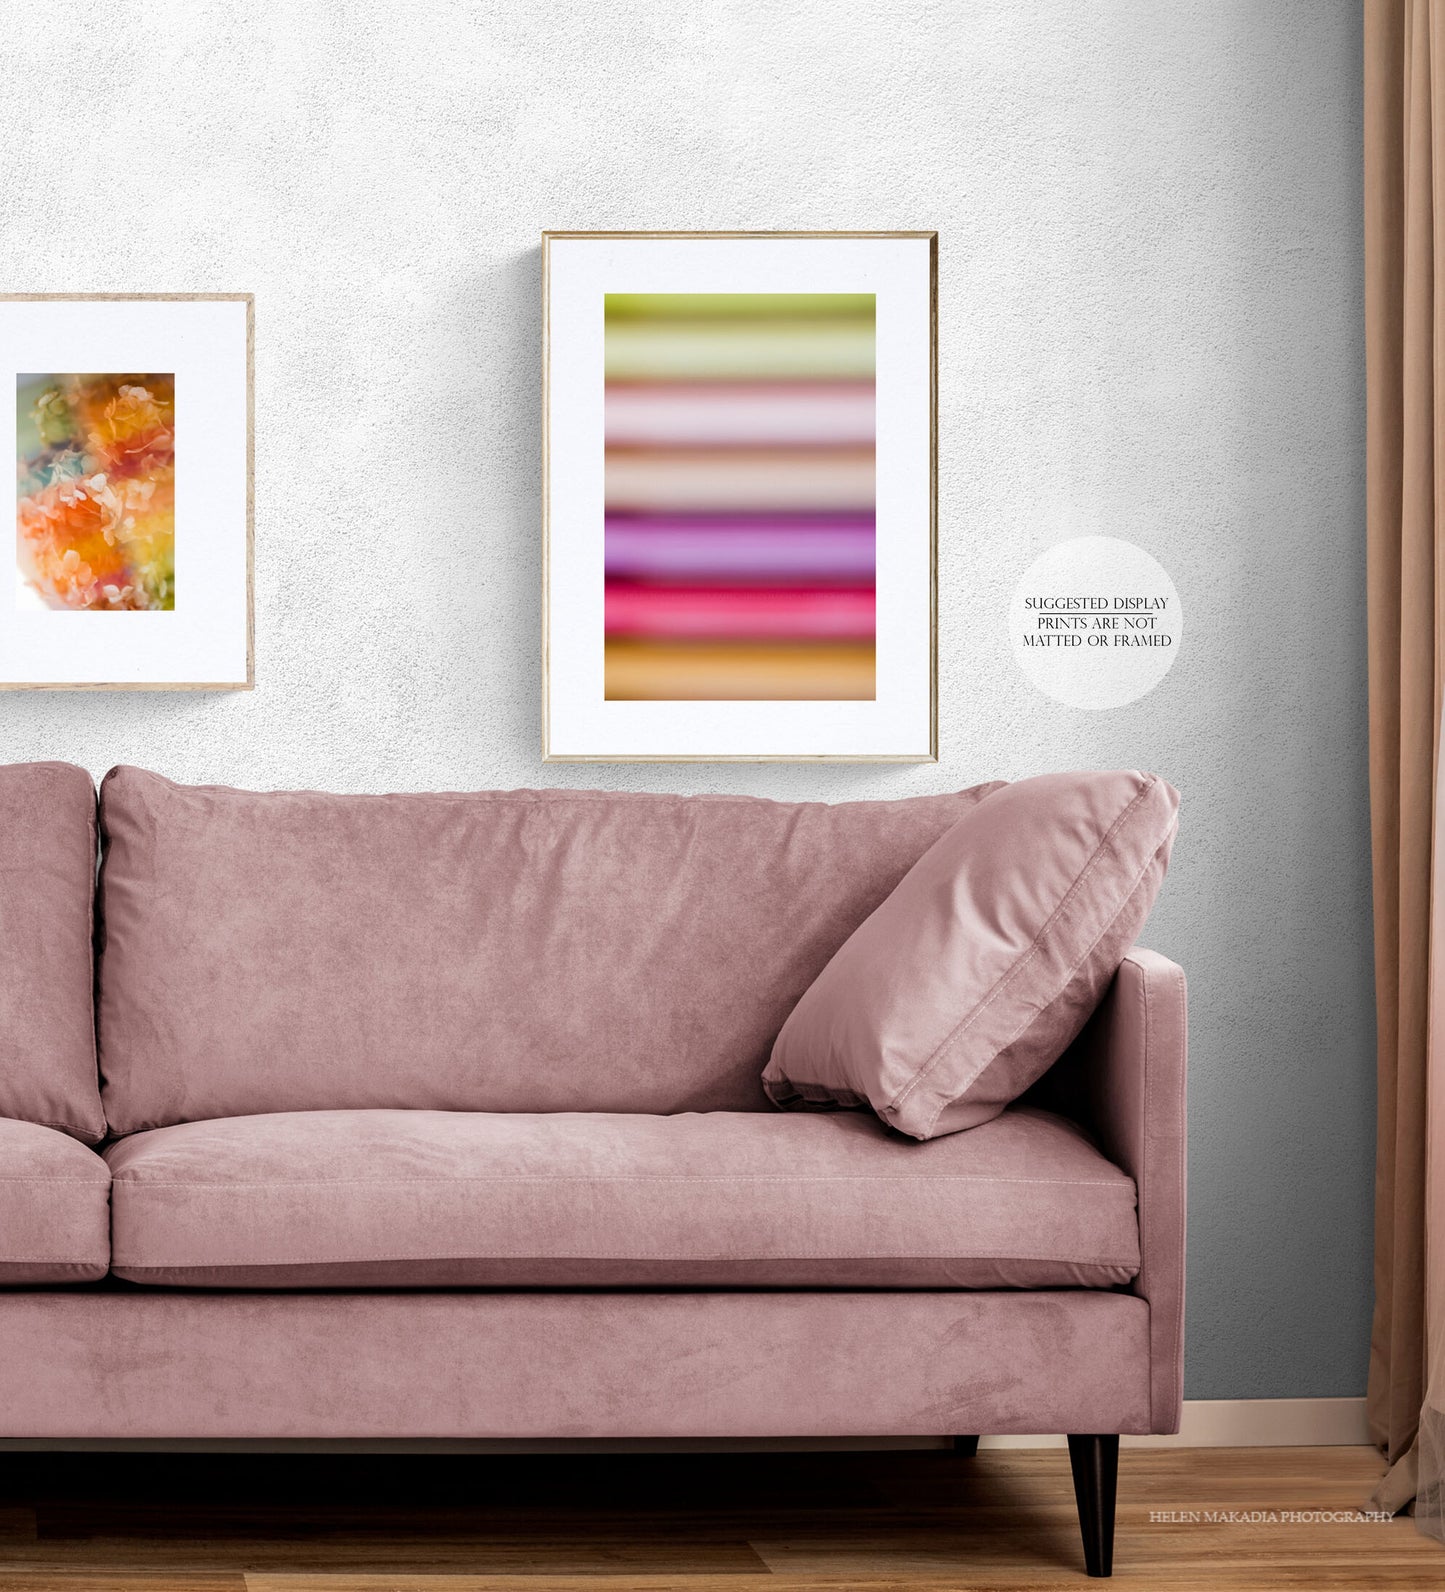 Framed Abstract Photograph of Purples and Pinks in a Living Room with a Pink Couch